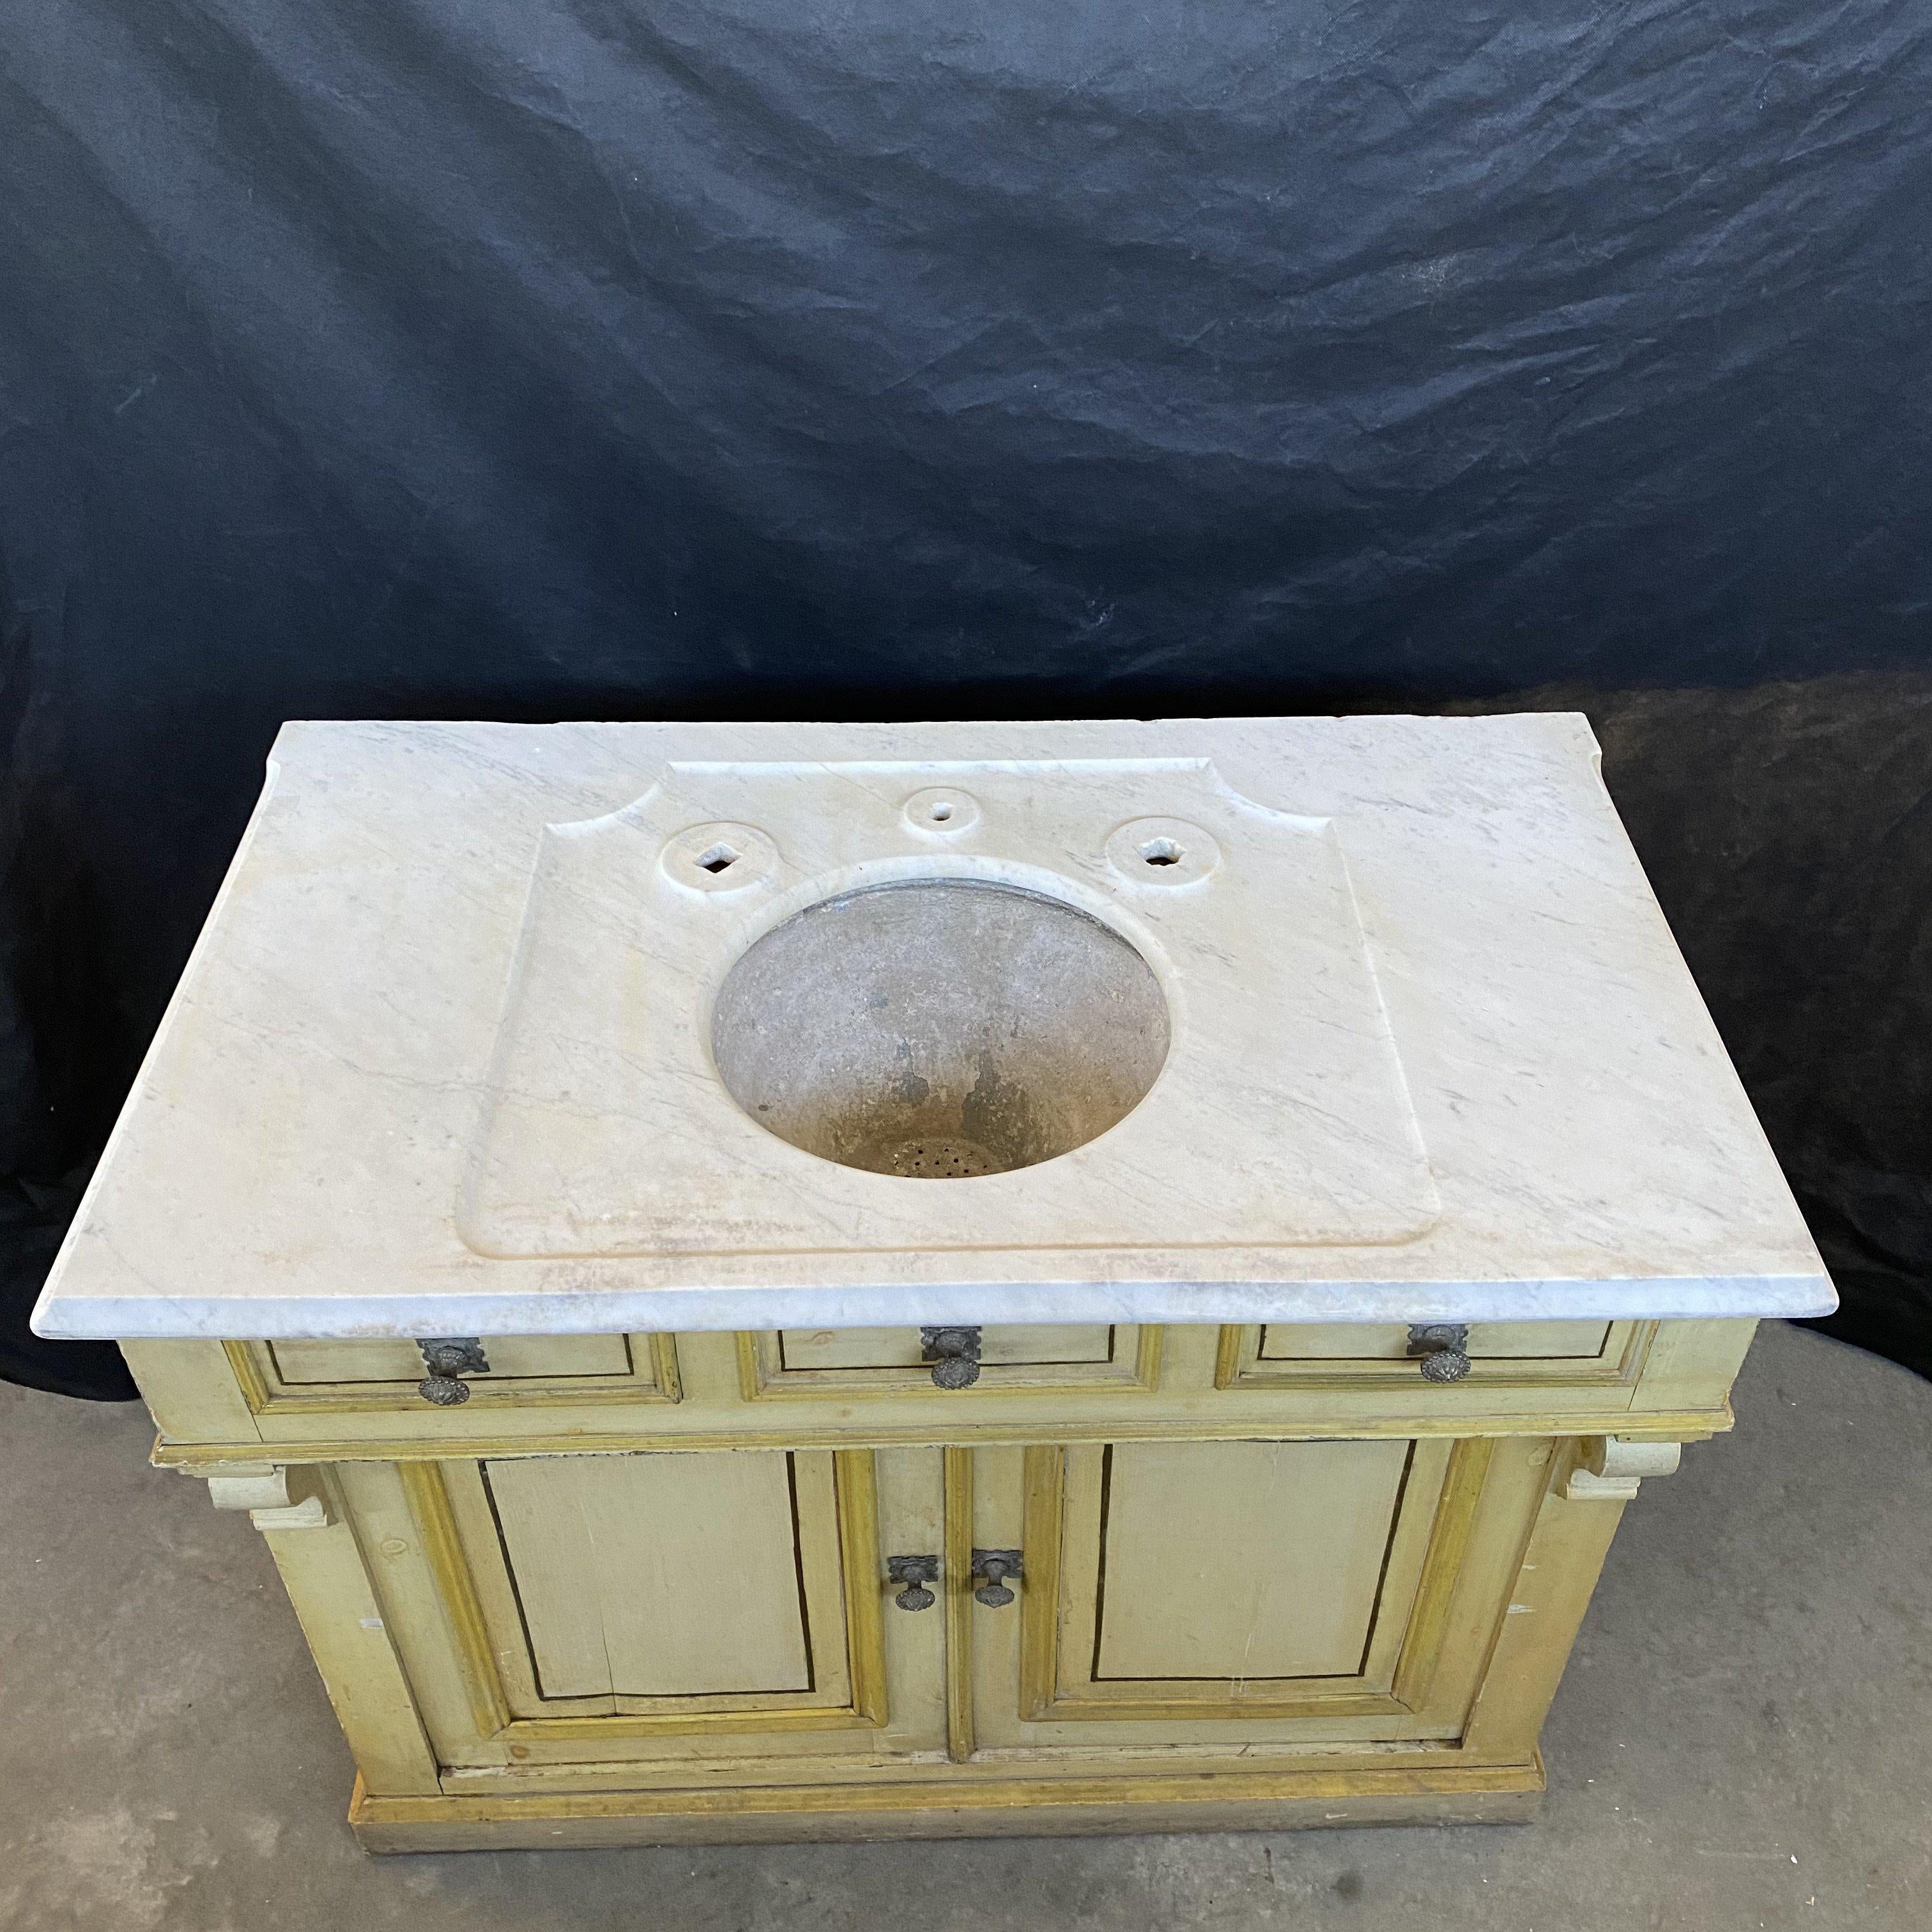 Really beautiful and classic French painting on this one-of-a-kind 19th century French marble countertop sink cabinet with classic French yellow original paint and zinc sink bowl. Two of the three drawers on top open (center is a faux drawer